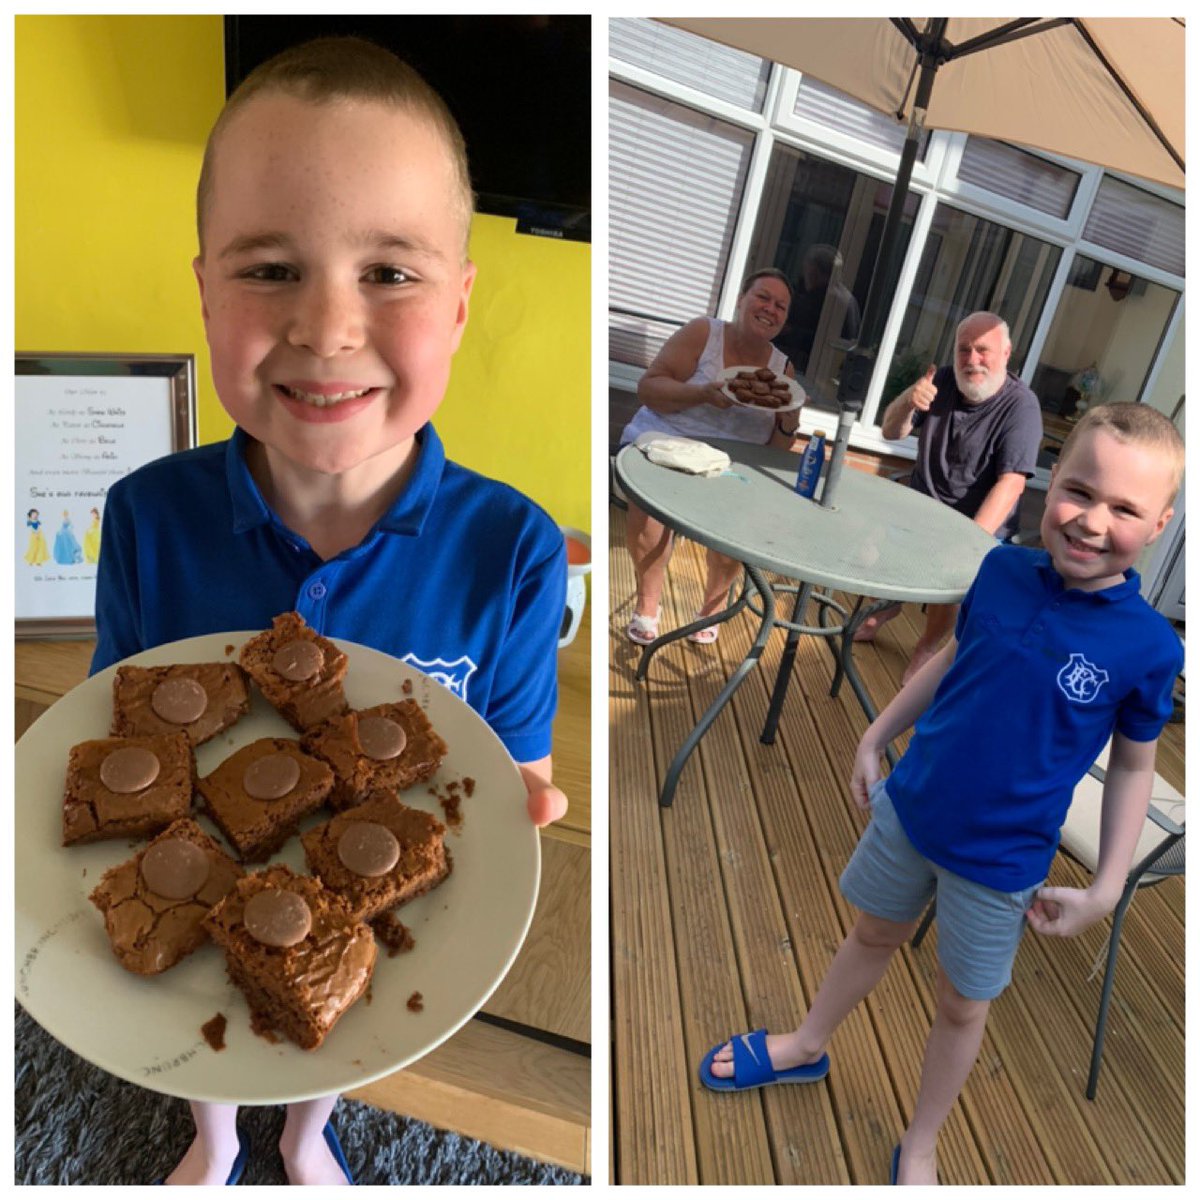 Today’s challenge was to make a cake to cheer someone up! Harry made GF brownies for his Grandma and Granddad 😍 @stjoes21 #SocialDistancing #7daykindnesschallenge #MentalHealthAwarenessWeek